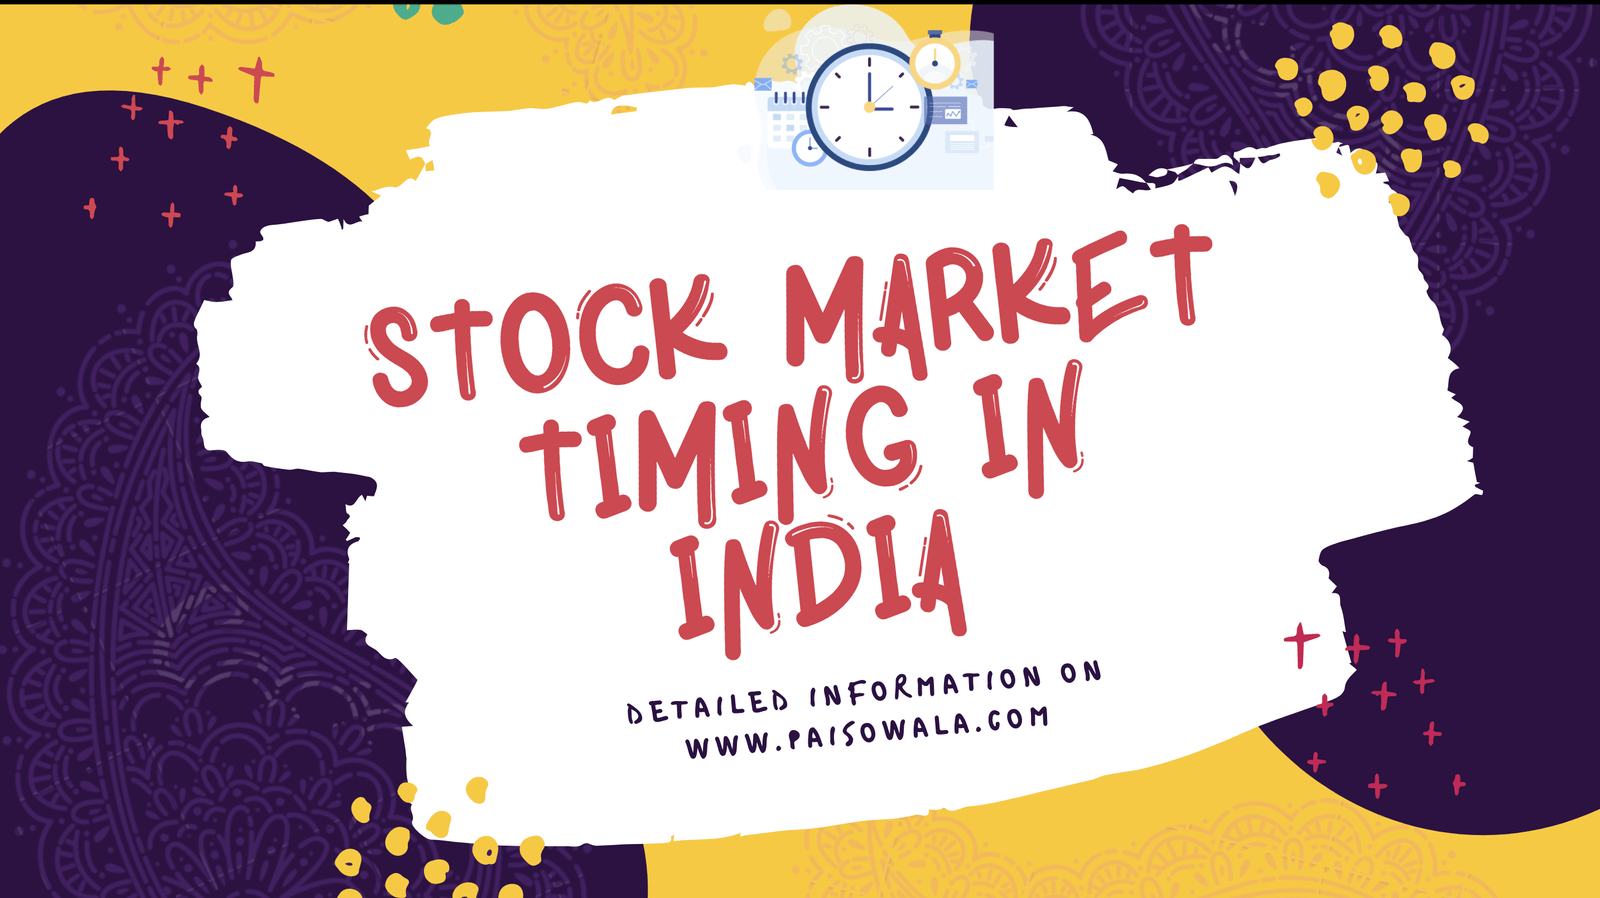 Share Market Timing In India poster